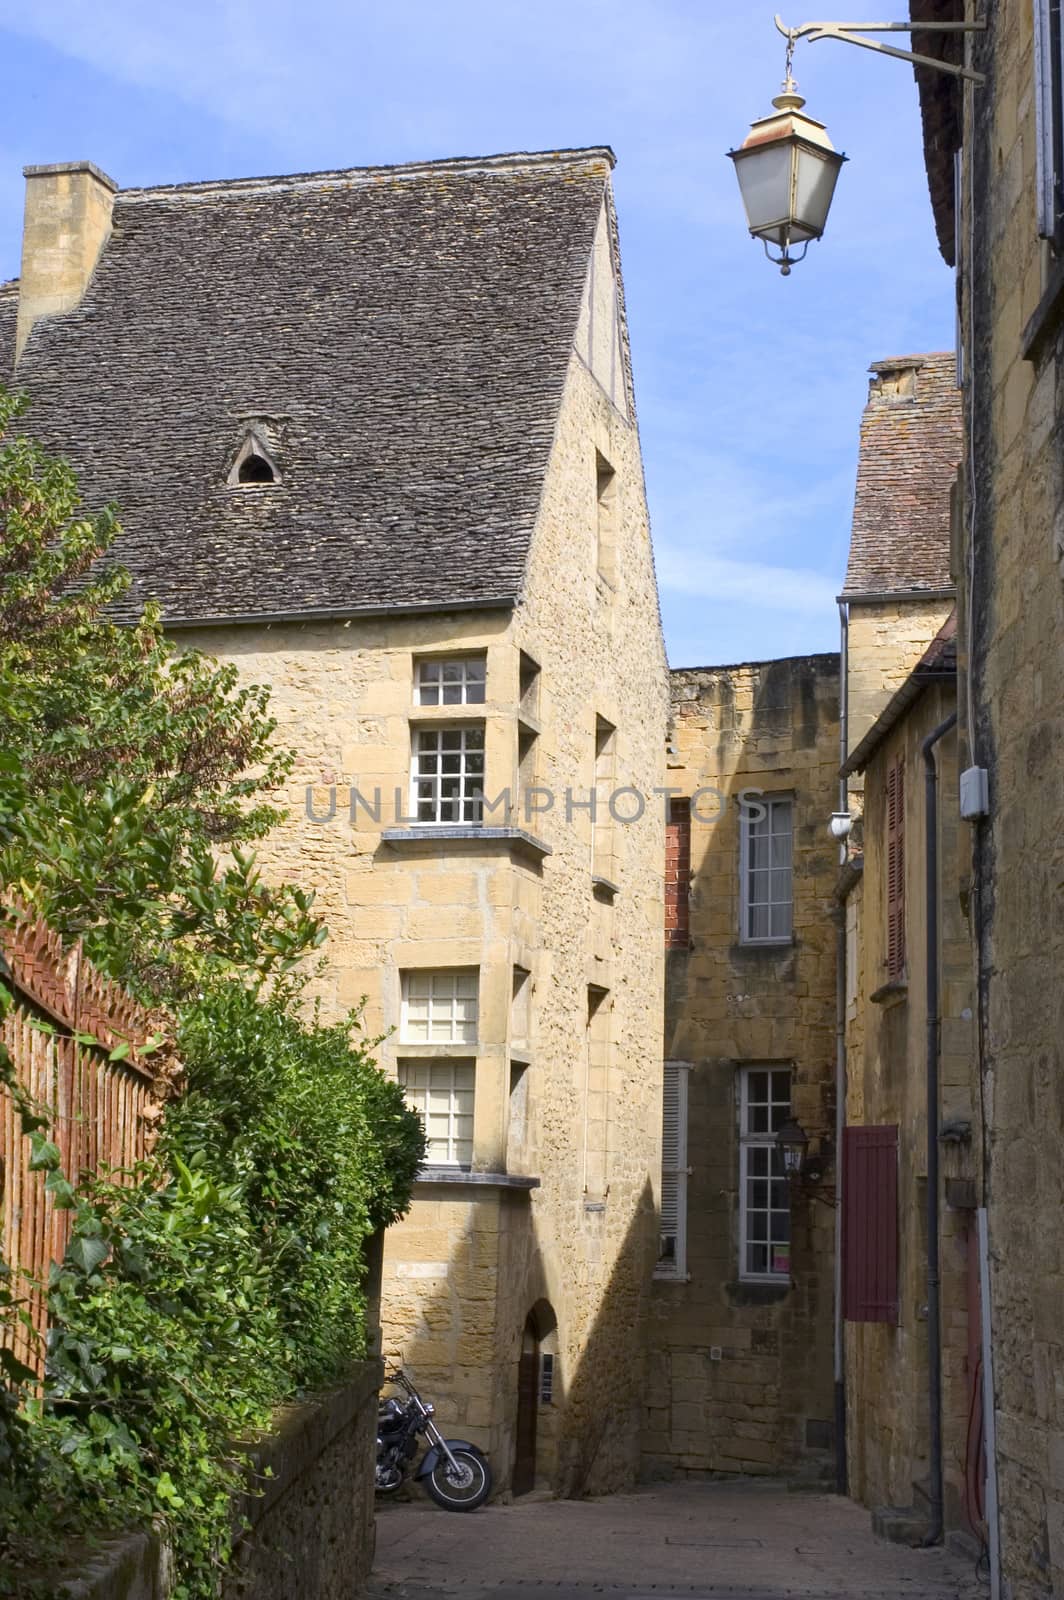 A street in the center of Sarlat by gillespaire